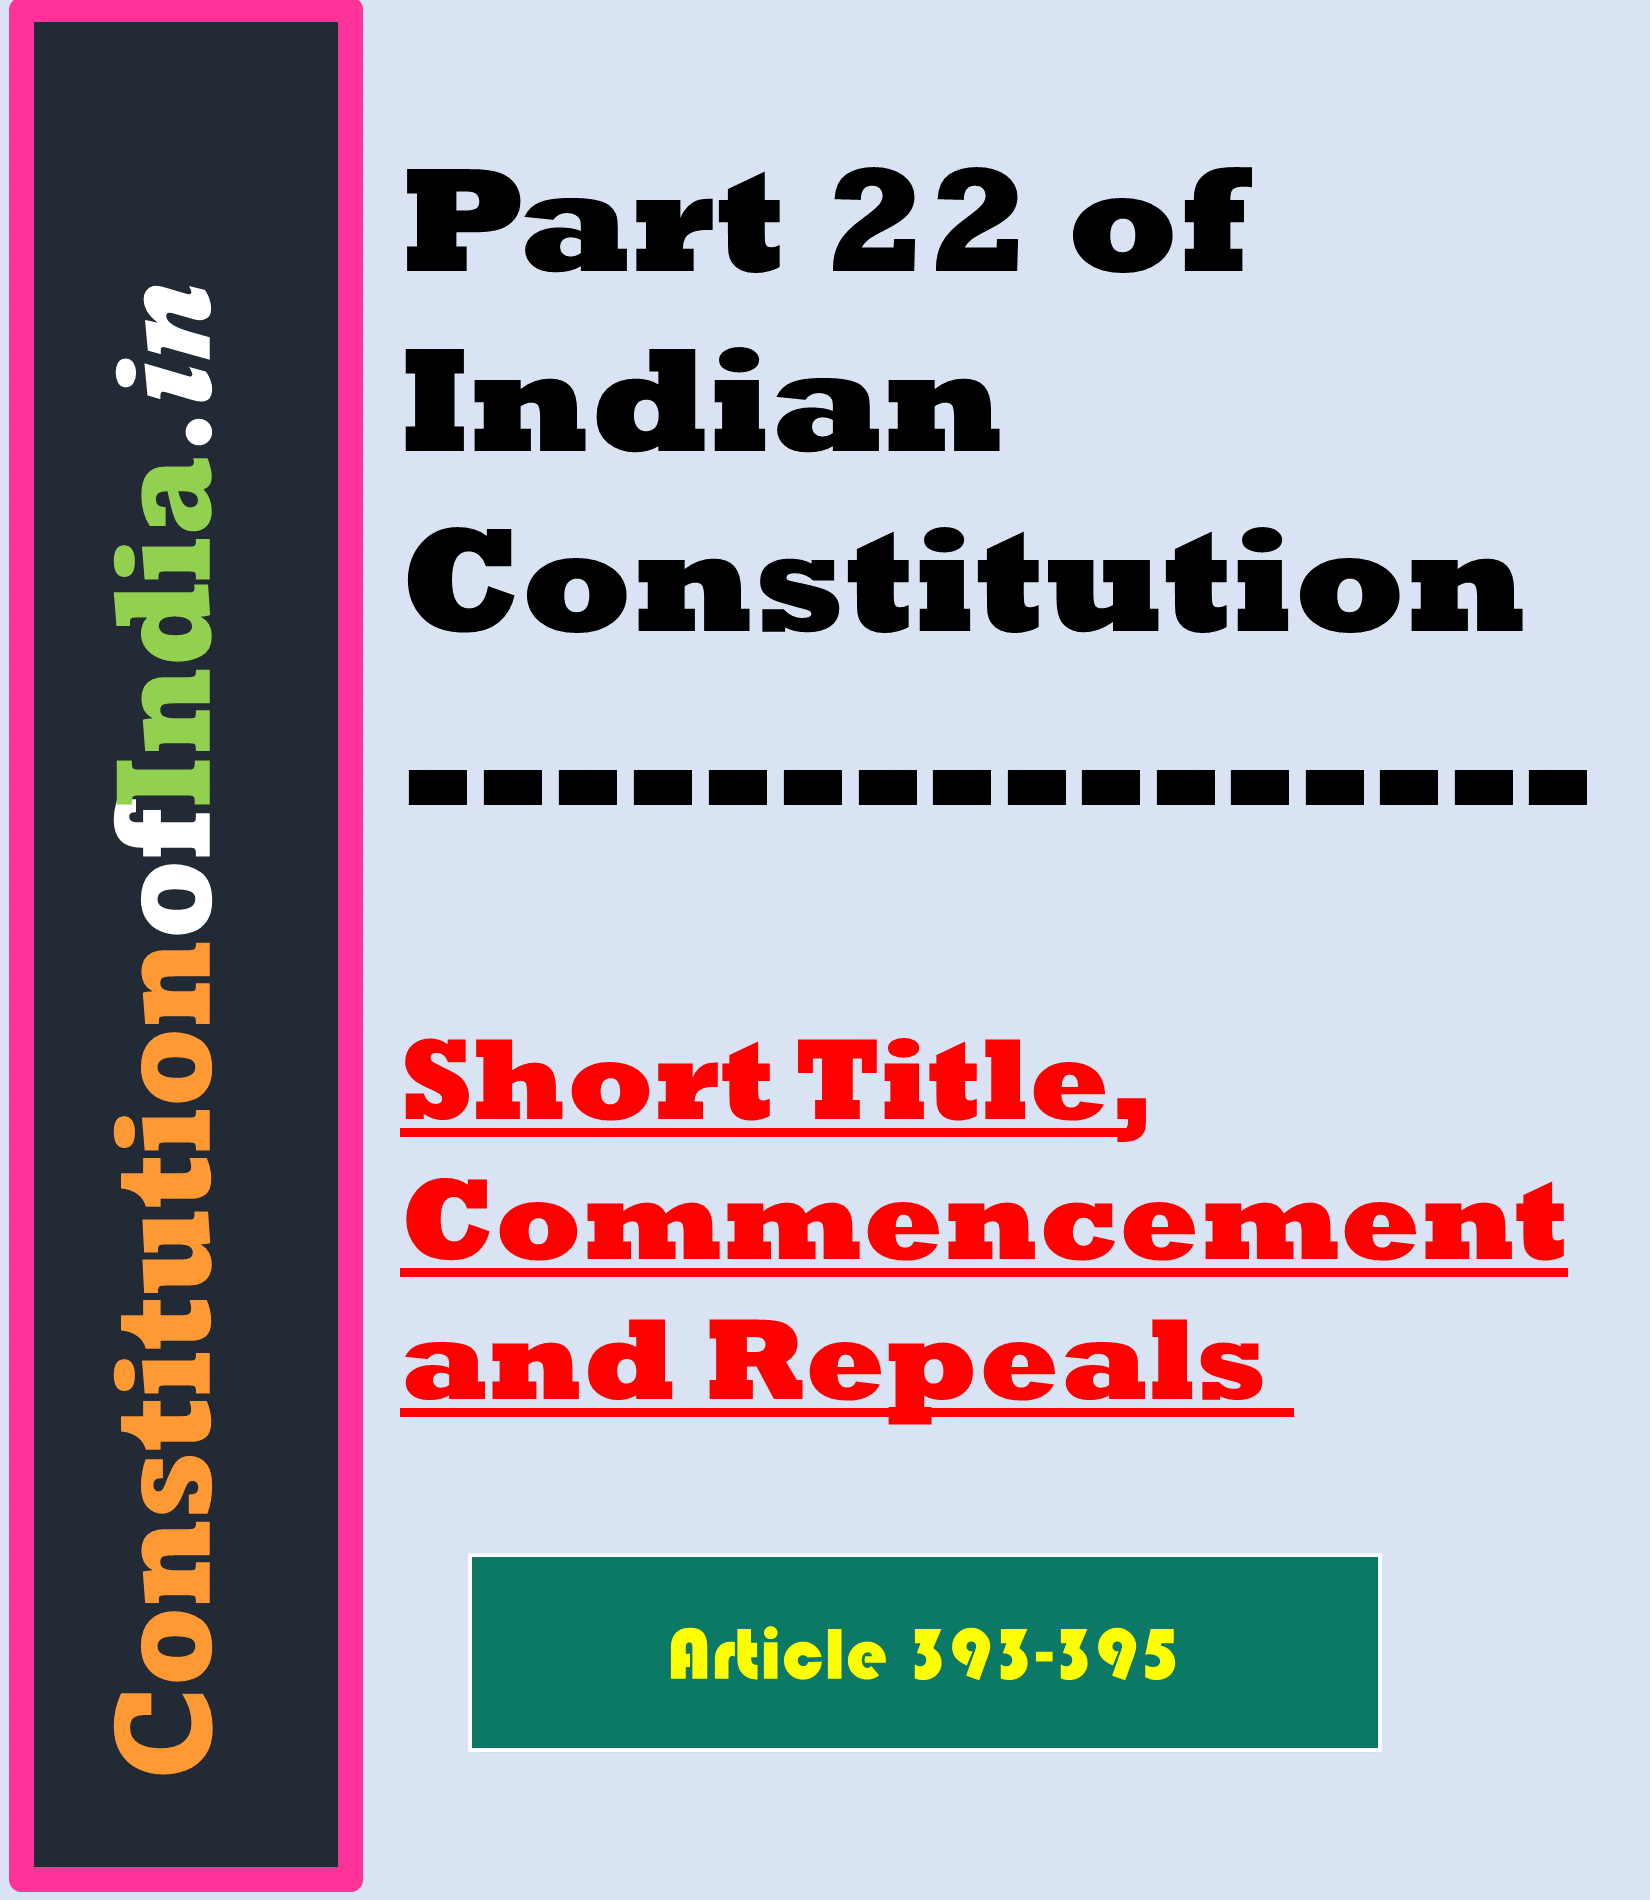 Part 22 of Indian Constiution